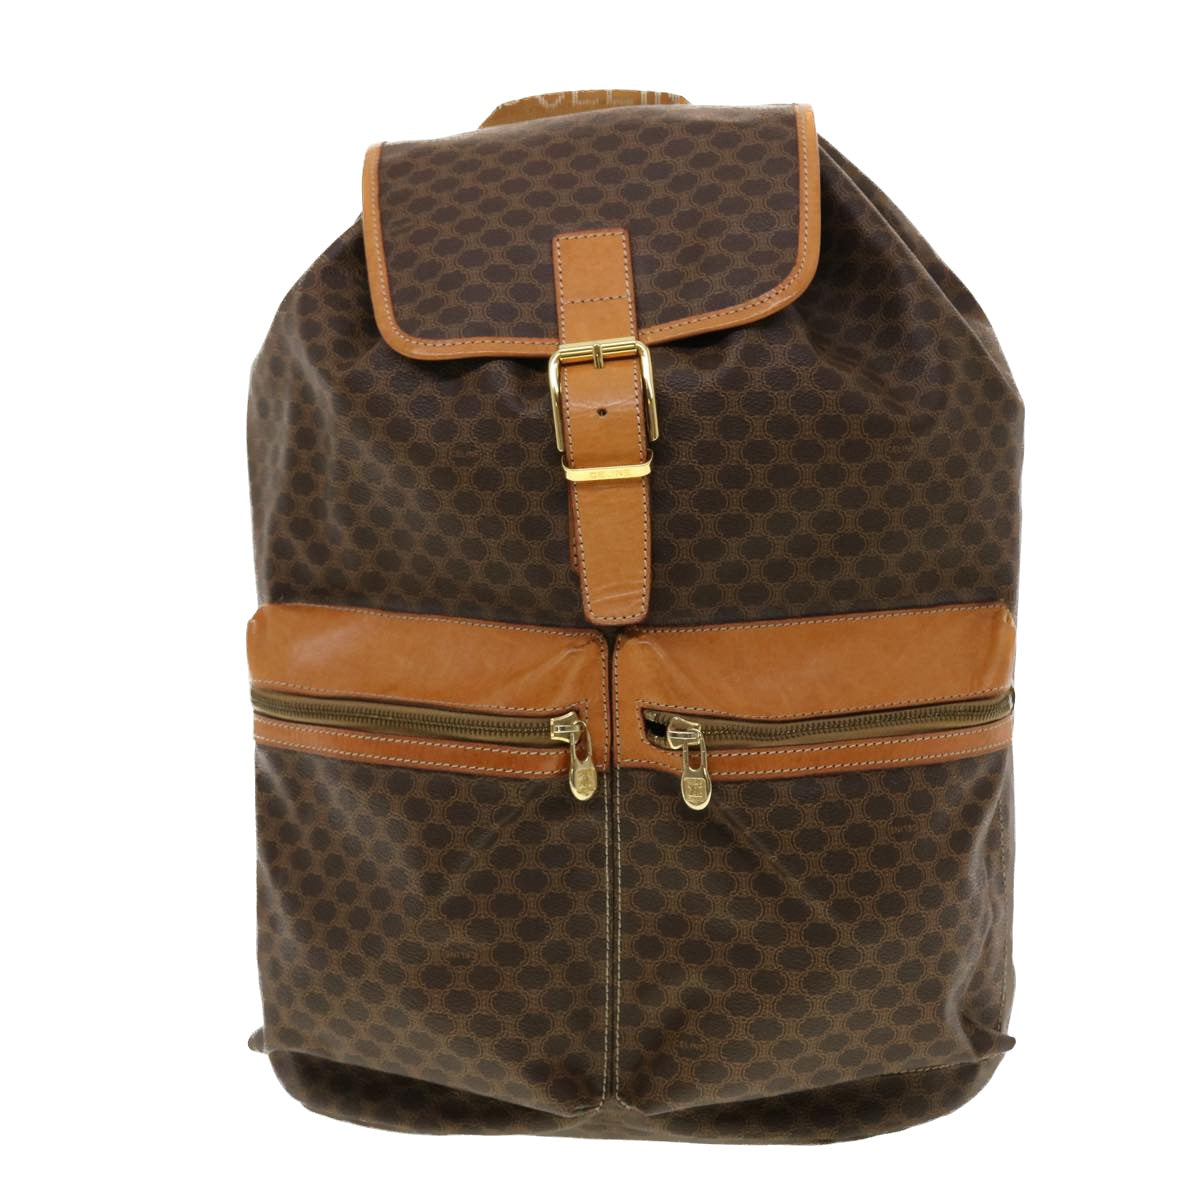 CELINE Macadam Canvas Backpack PVC Leather Brown Auth 40328